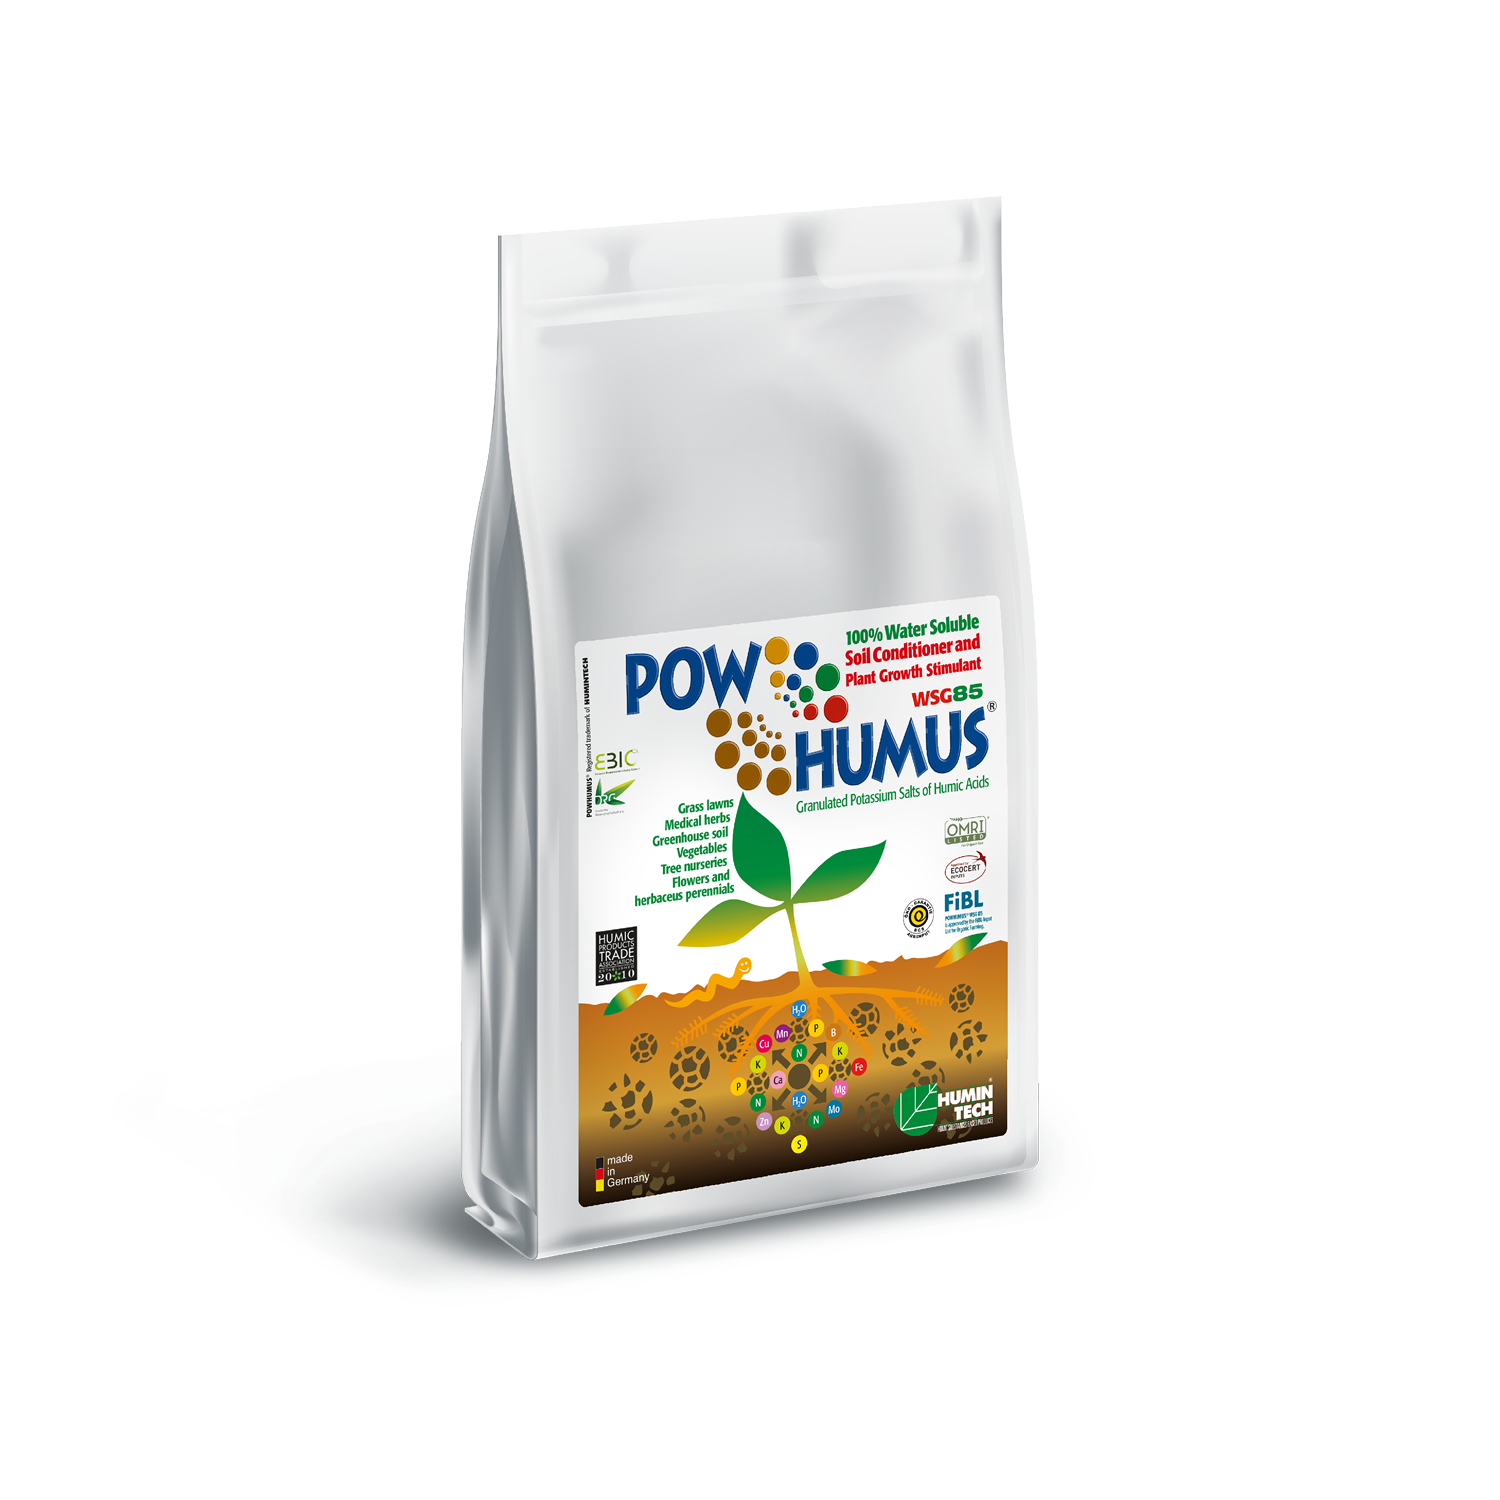 POWHUMUS® WSG 85 water-soluble organic plant growth stimulant and soil conditioner